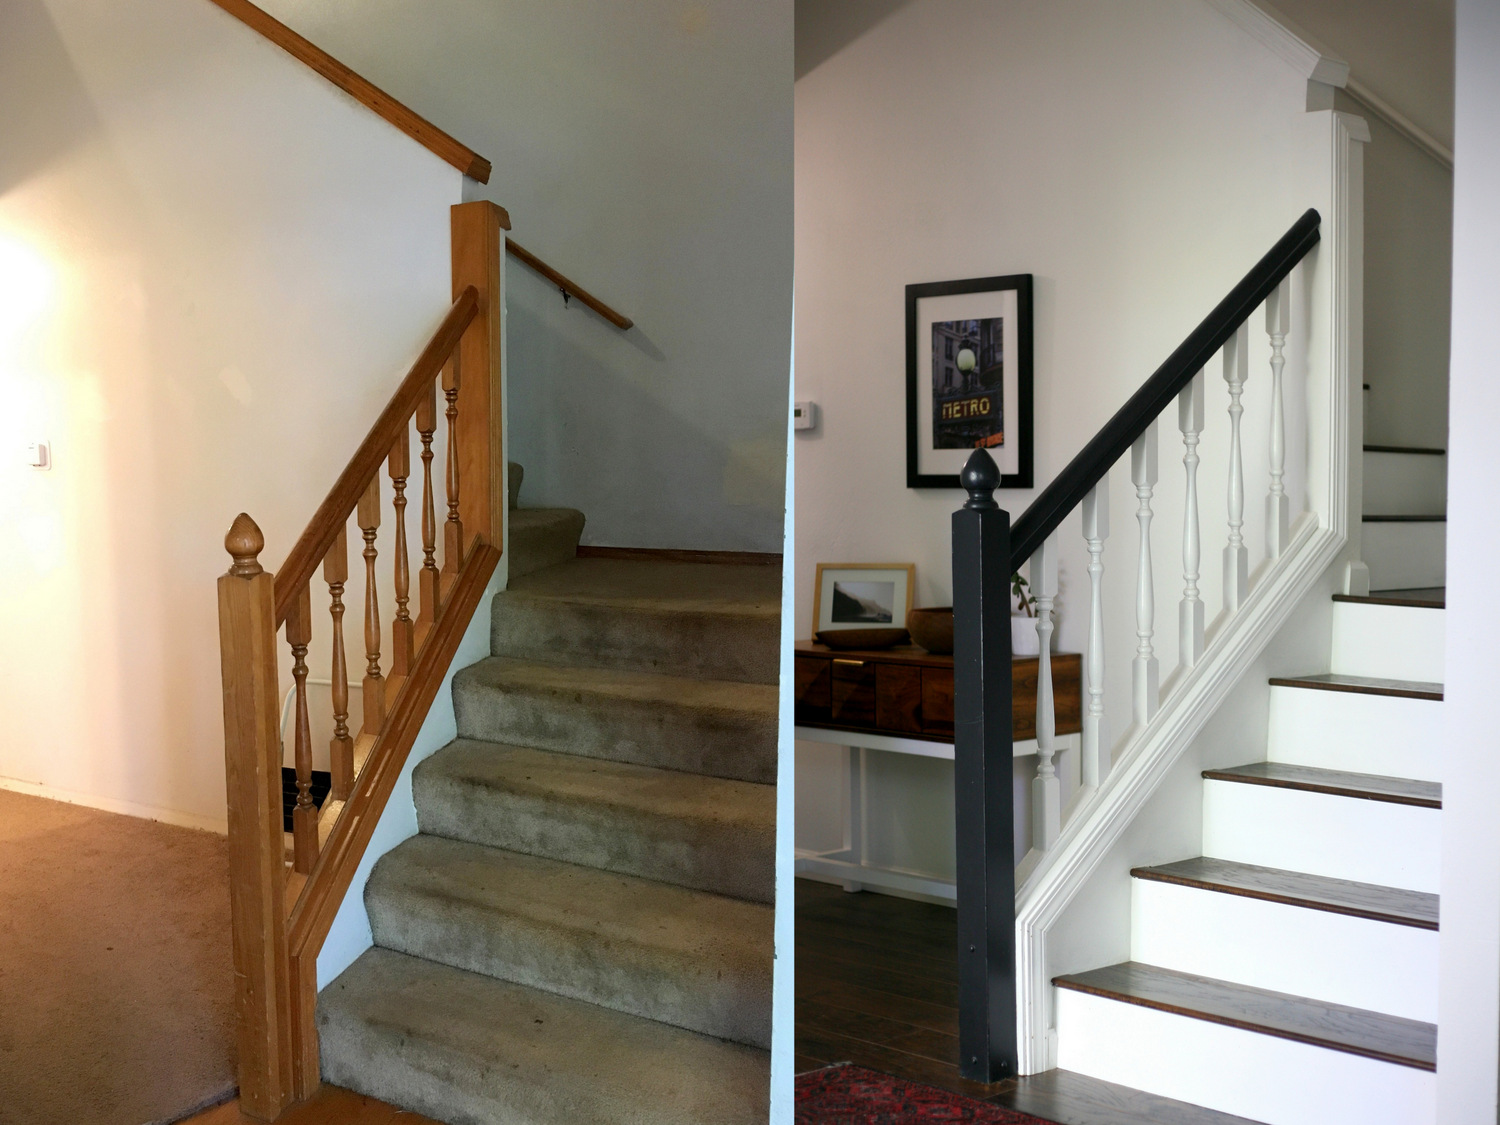 Laminate Stair Flooring Finally Done, How Do You Put Laminate Flooring On Stairs